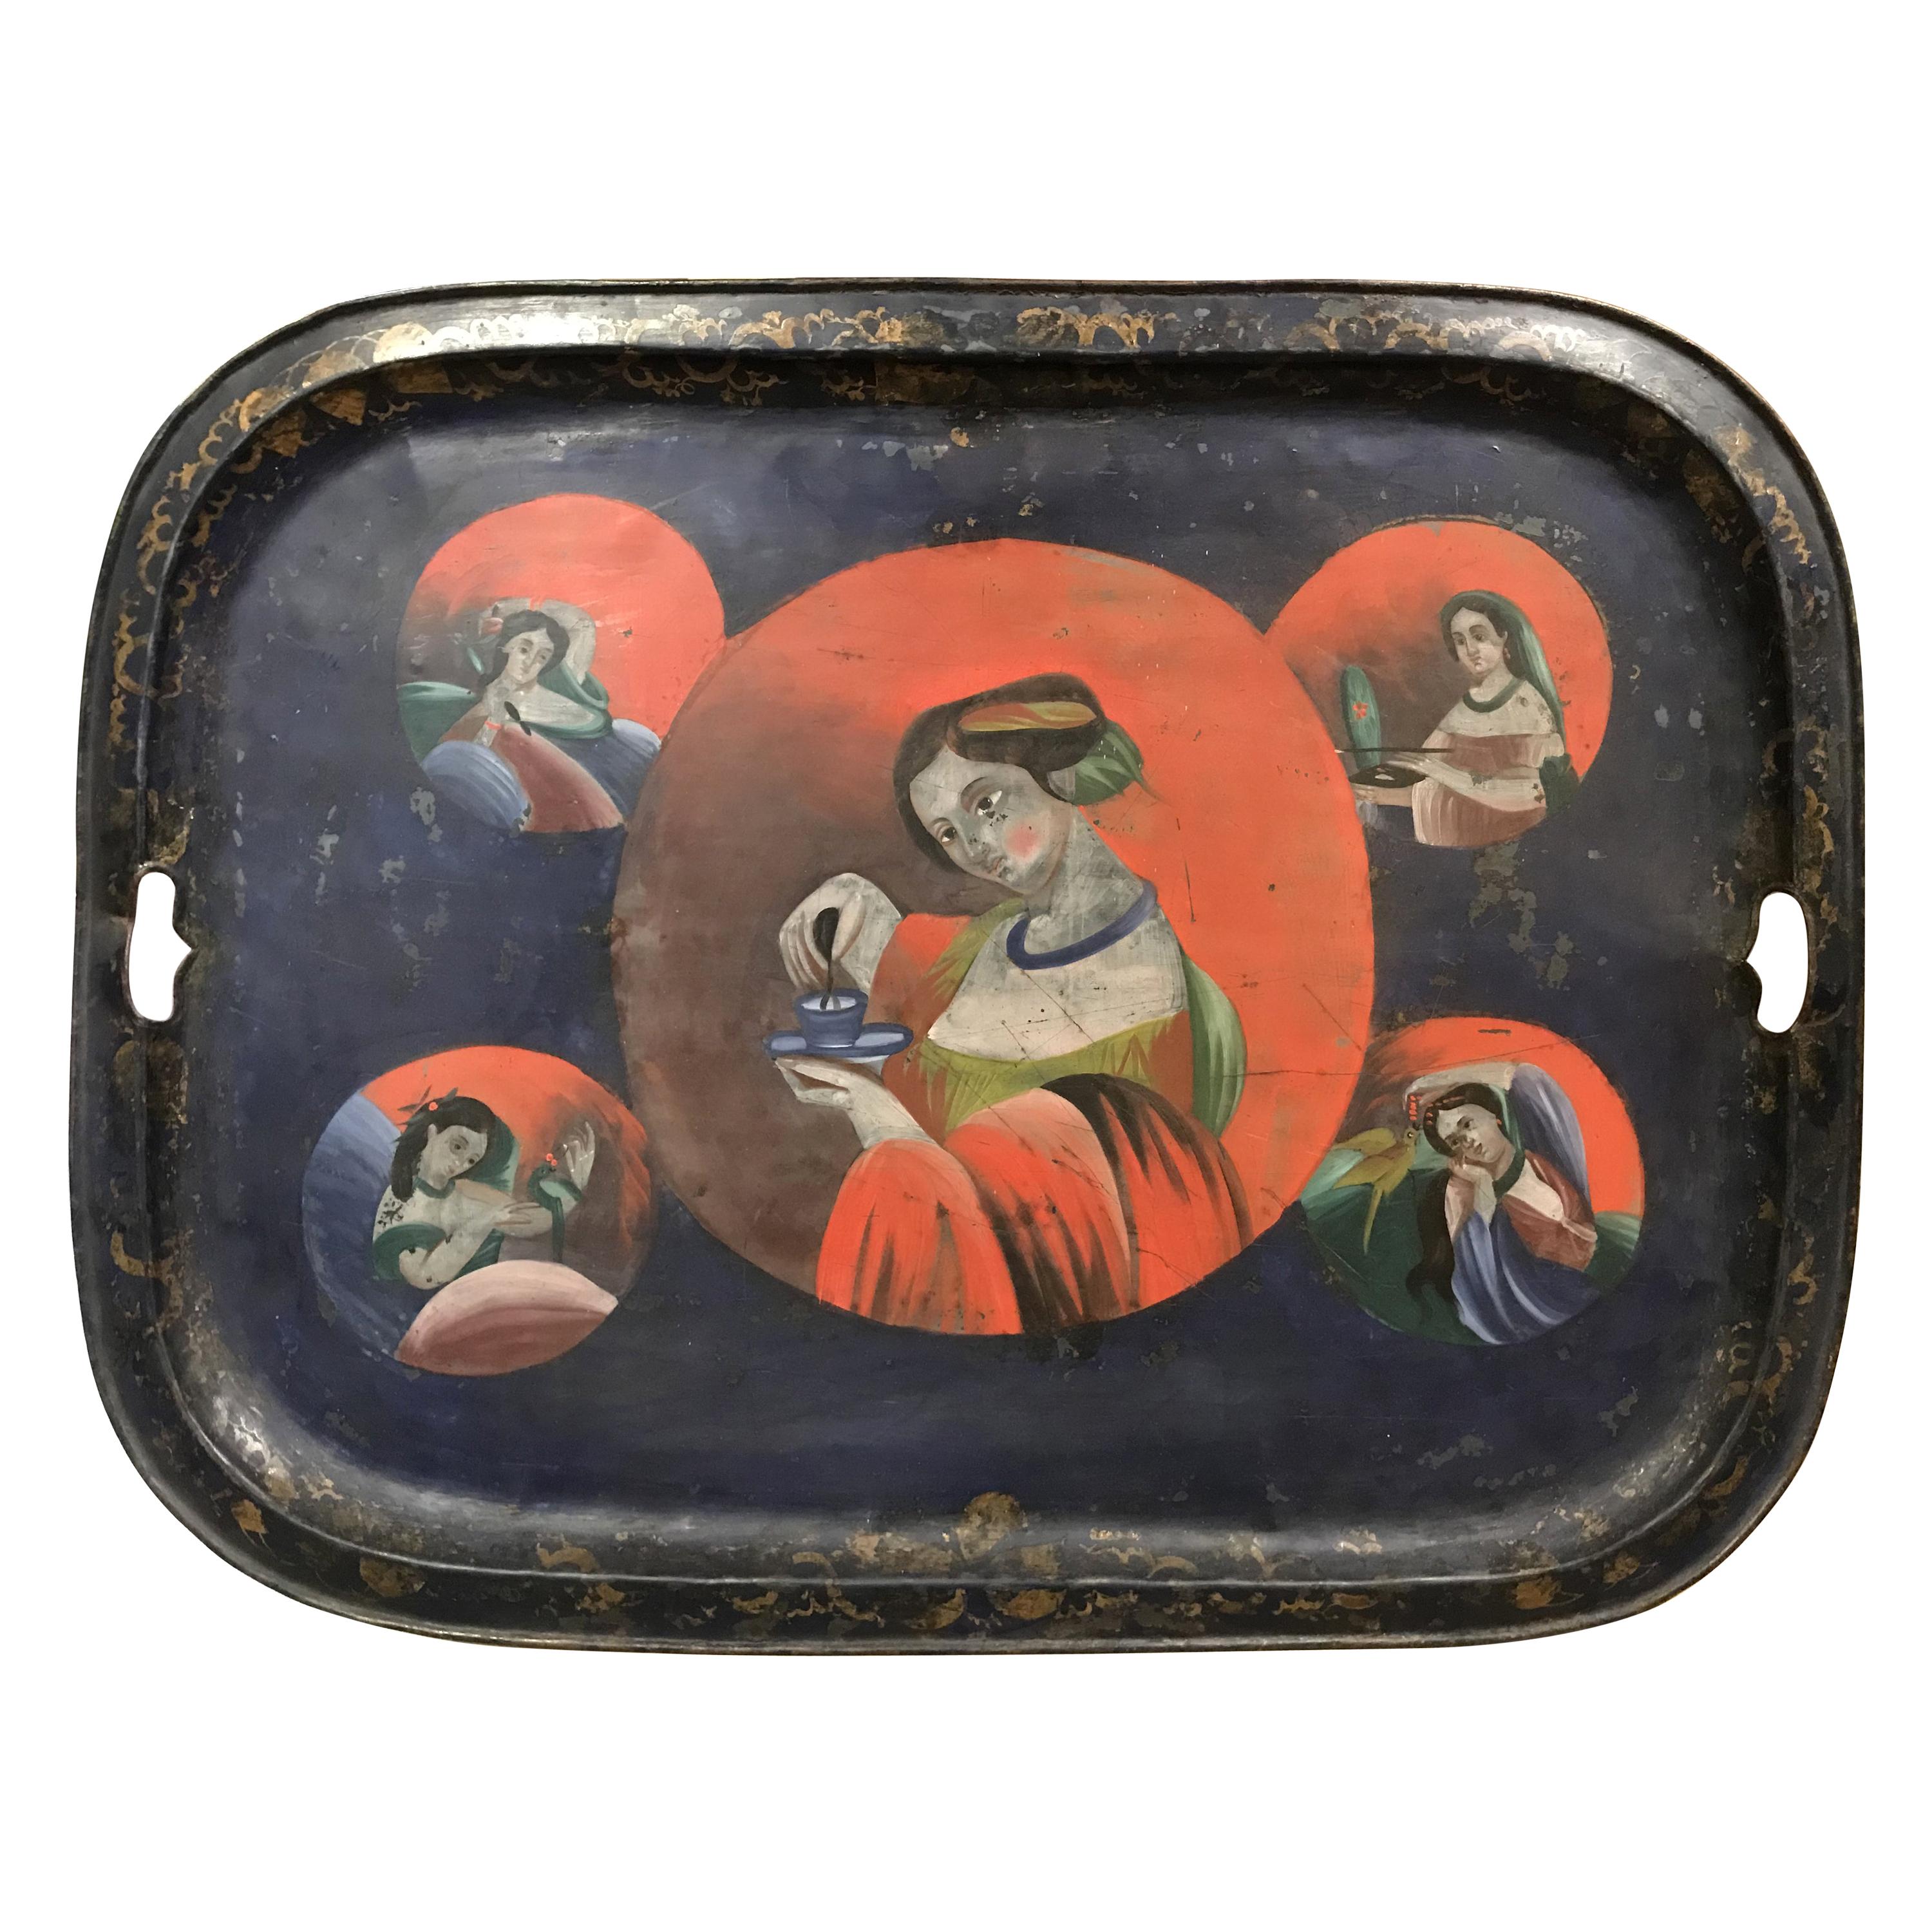 China Trade Hand Painted Tray with Female Figures circa 1820